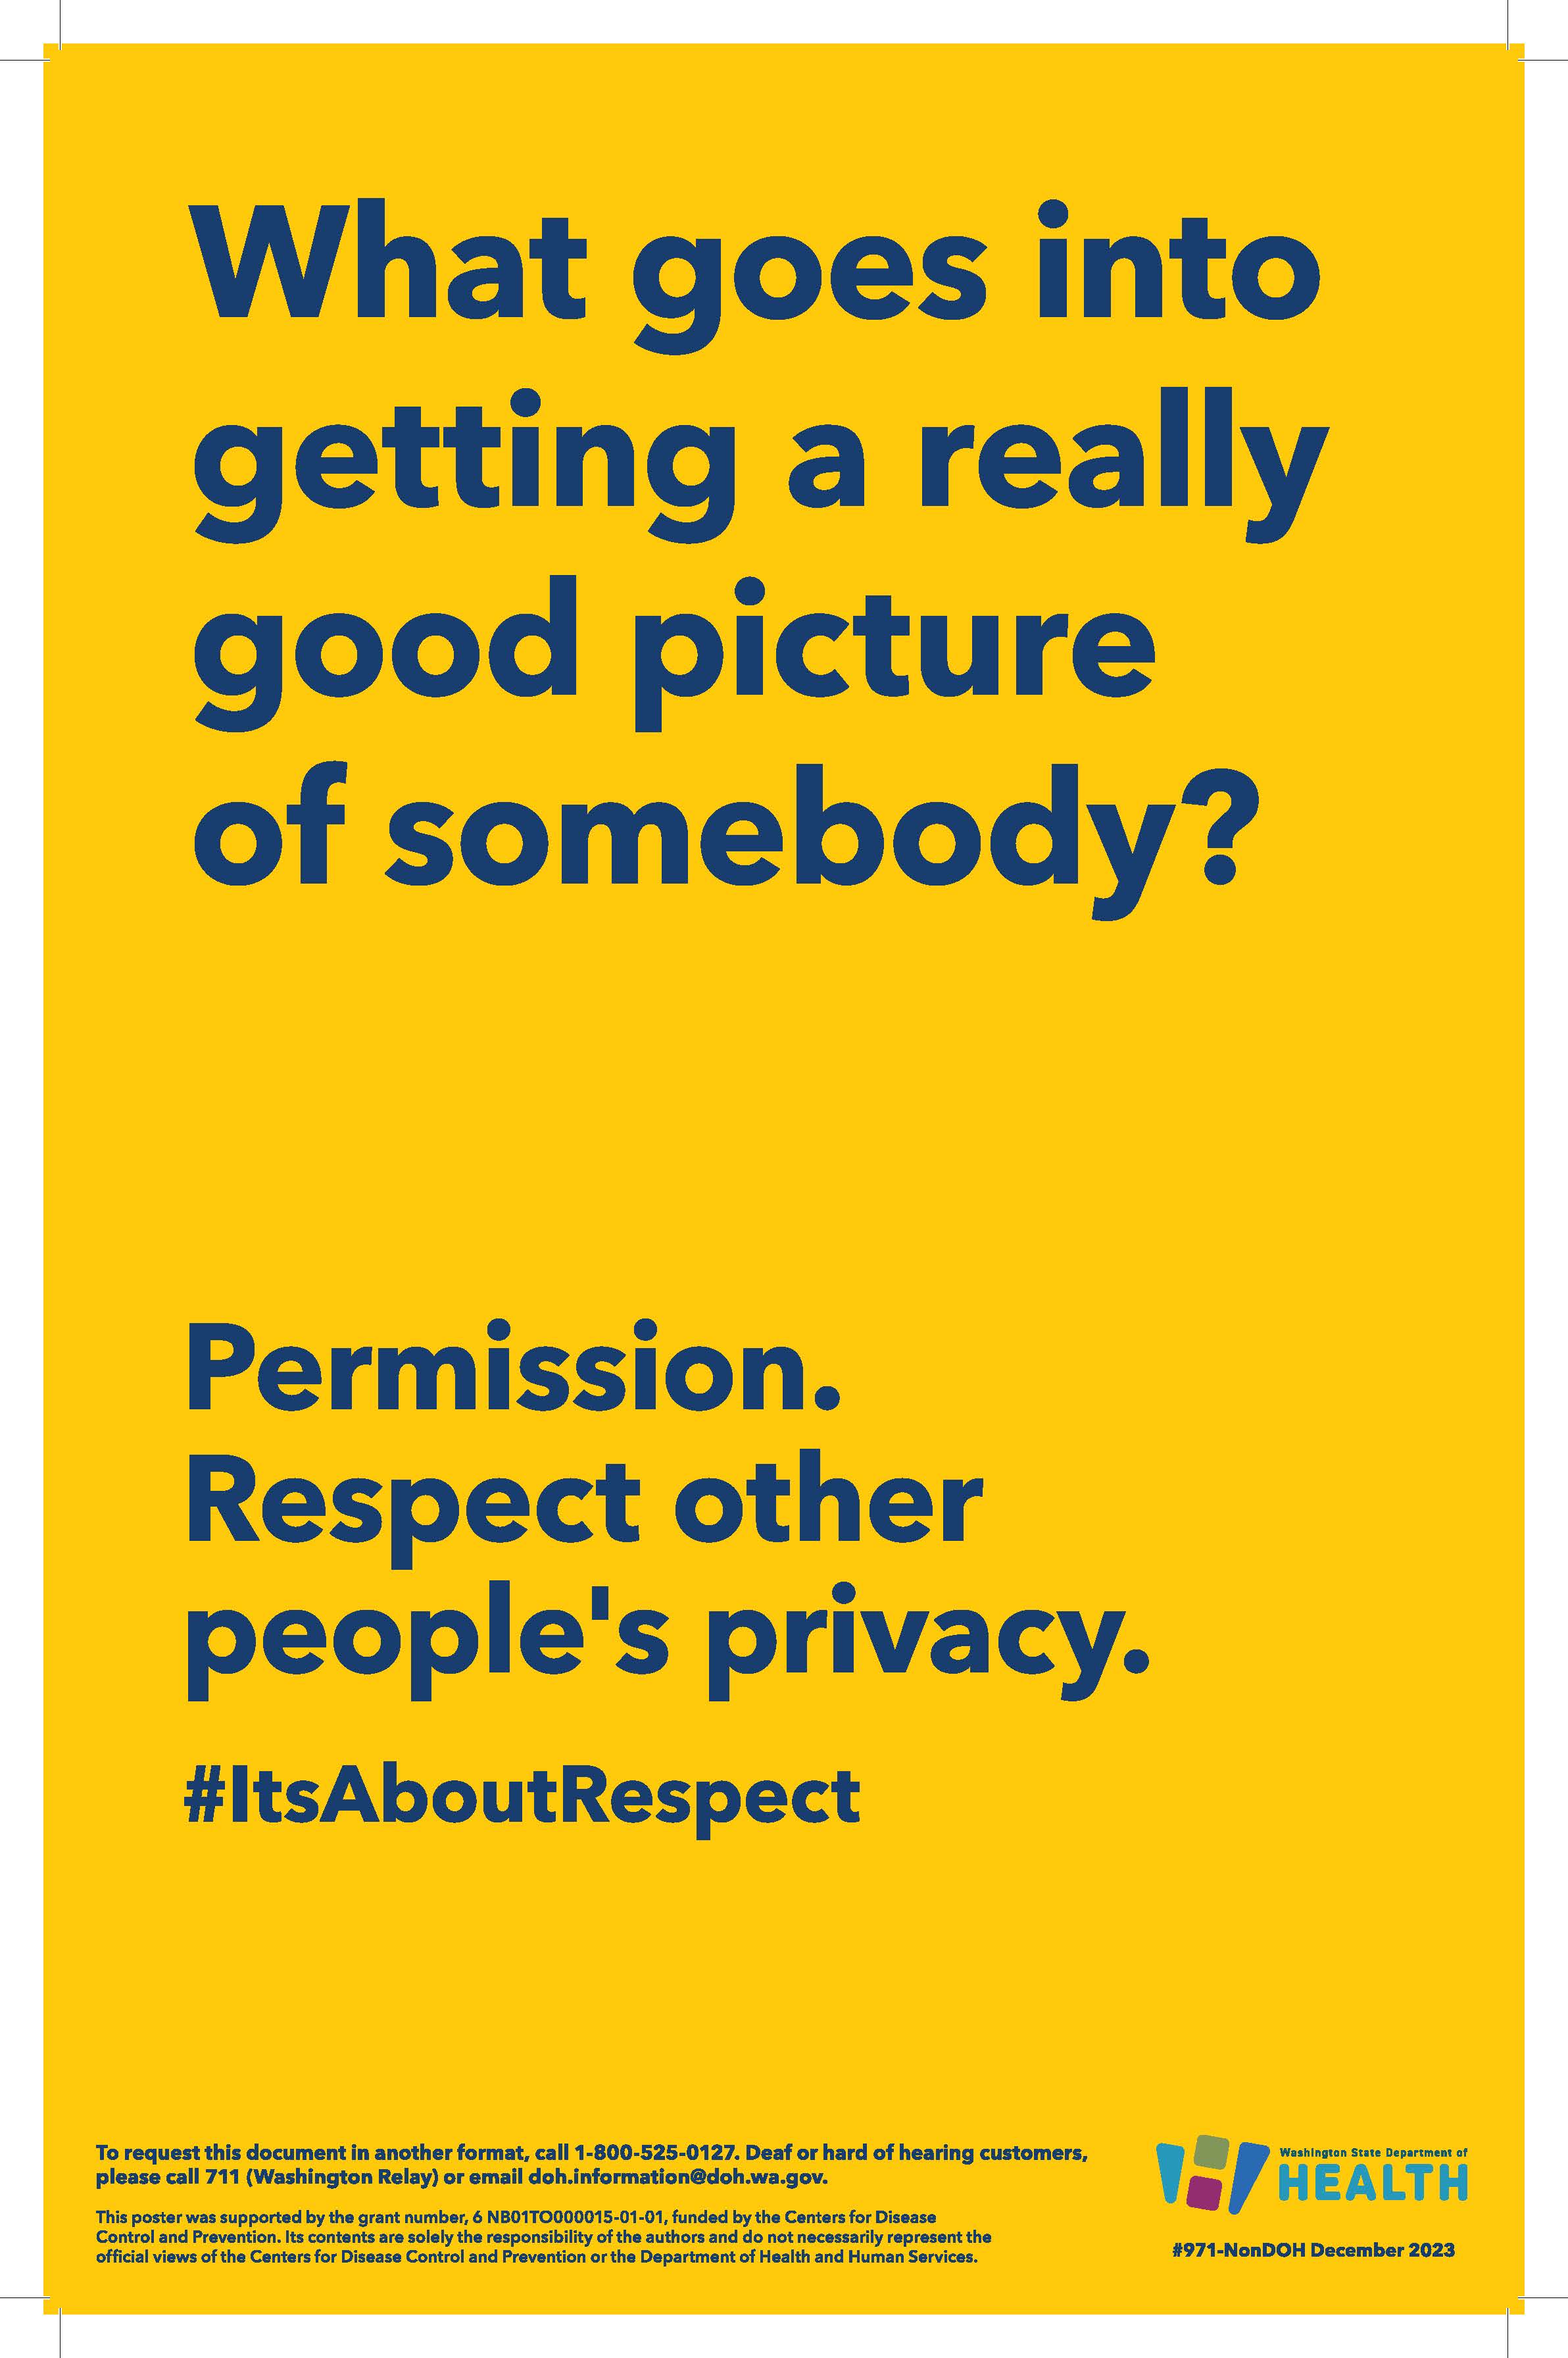 This poster image says “What goes into getting a really good picture of somebody? Permission” and features a cat in a plumed hat and the hashtag “it's about respect”.